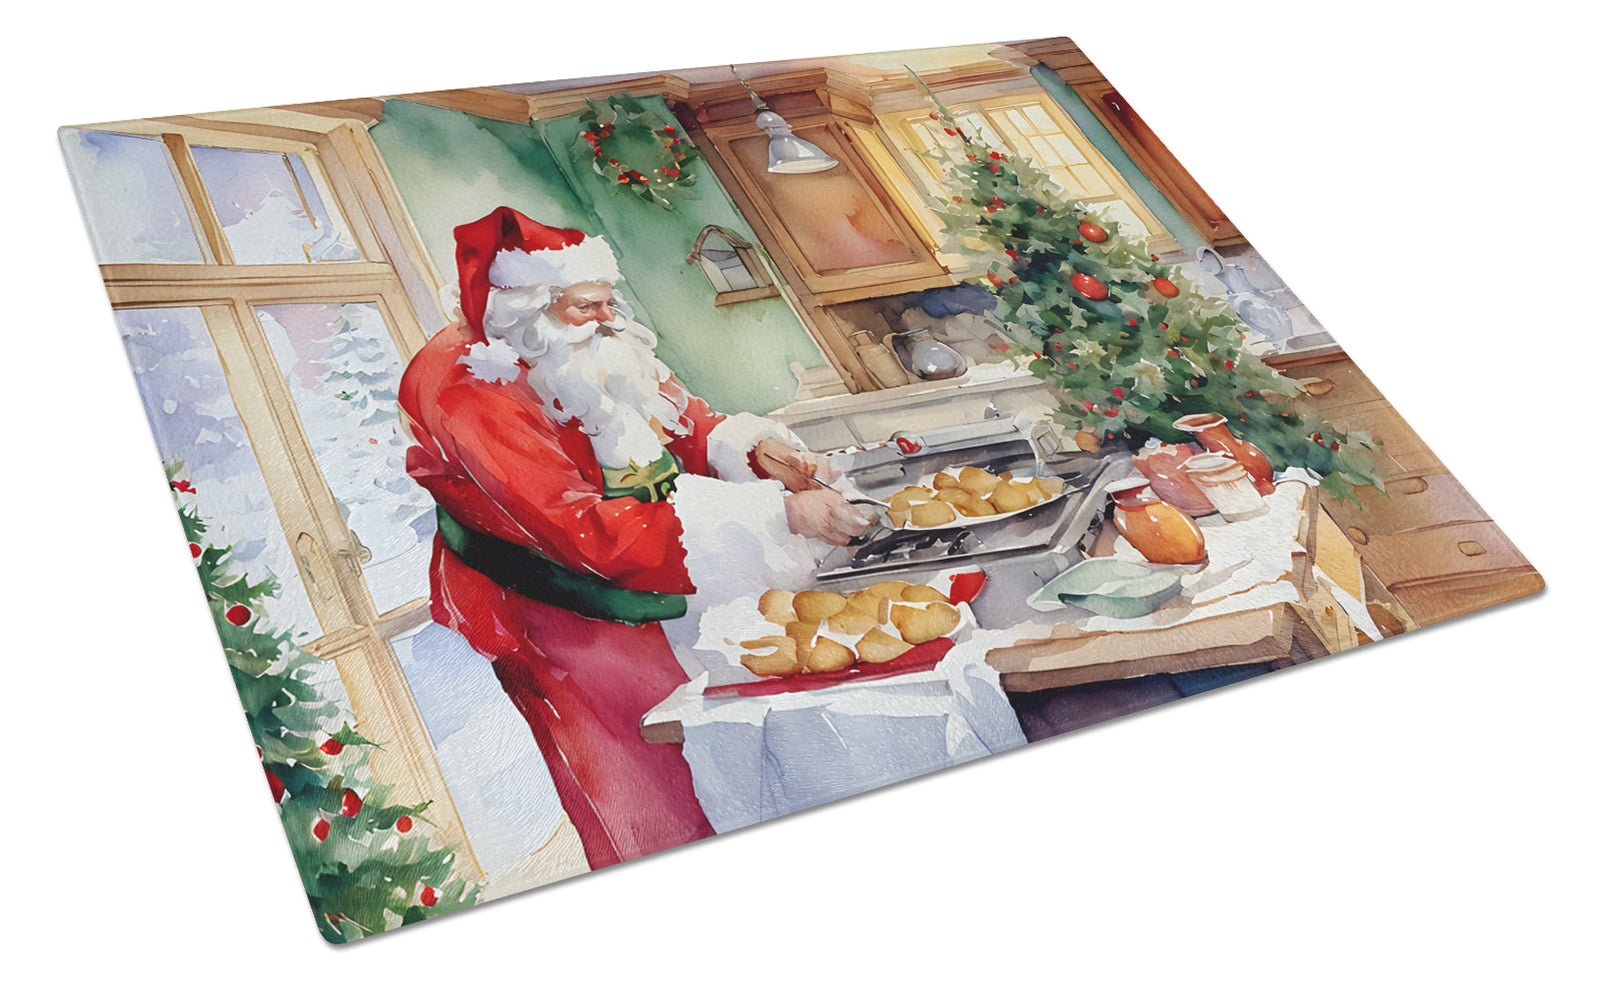 Buy this Cookies with Santa Claus Father Christmas Glass Cutting Board Large